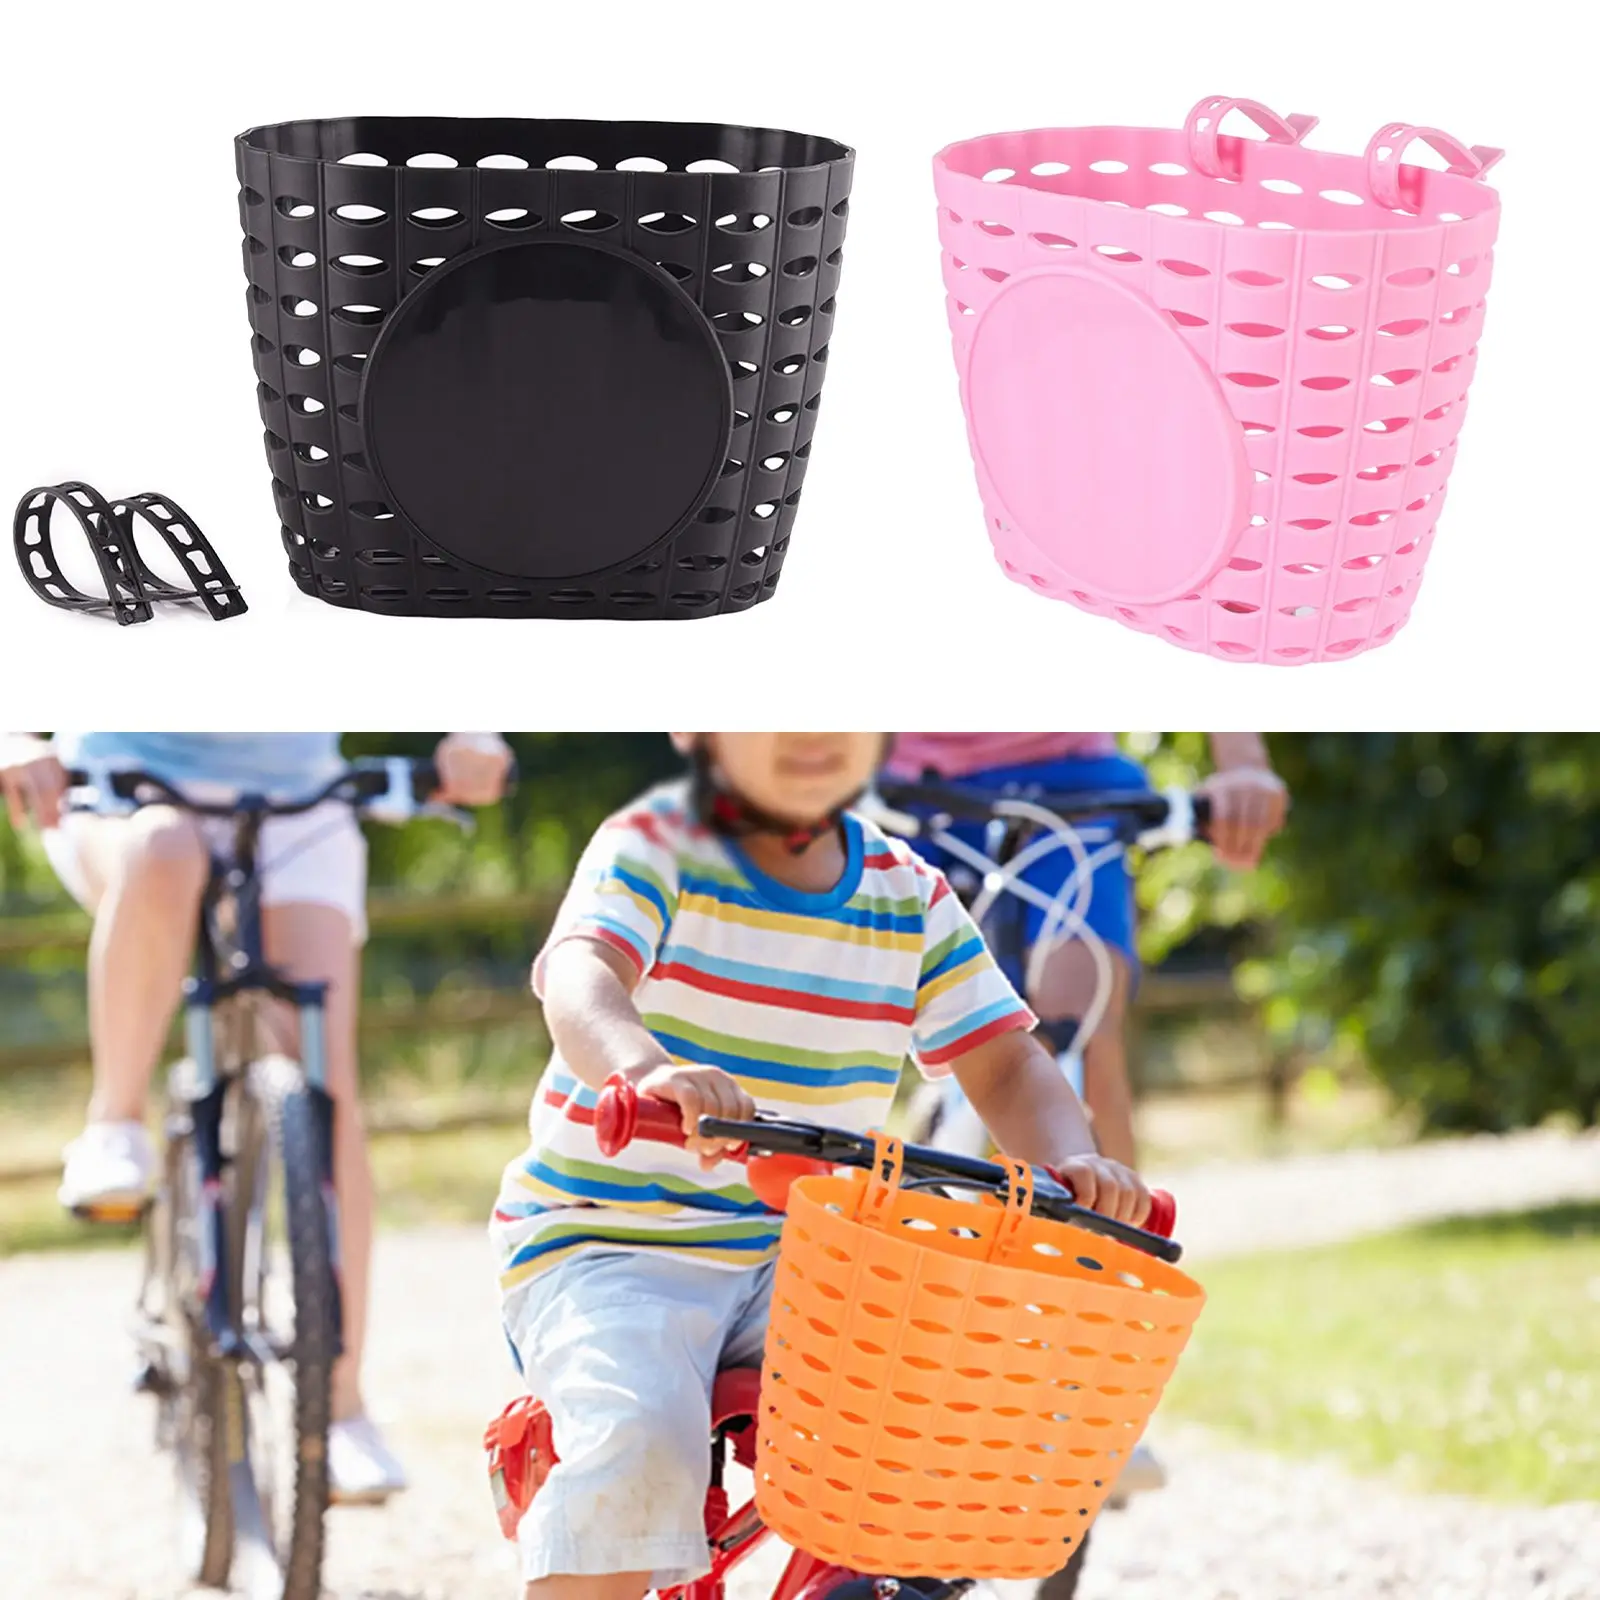 

1pc Bicycle Basket Hot Sale 20x14.7x12.2cm Plastic Basket Removebale Mount Carrying Storage Replacement Bike Part Accessories